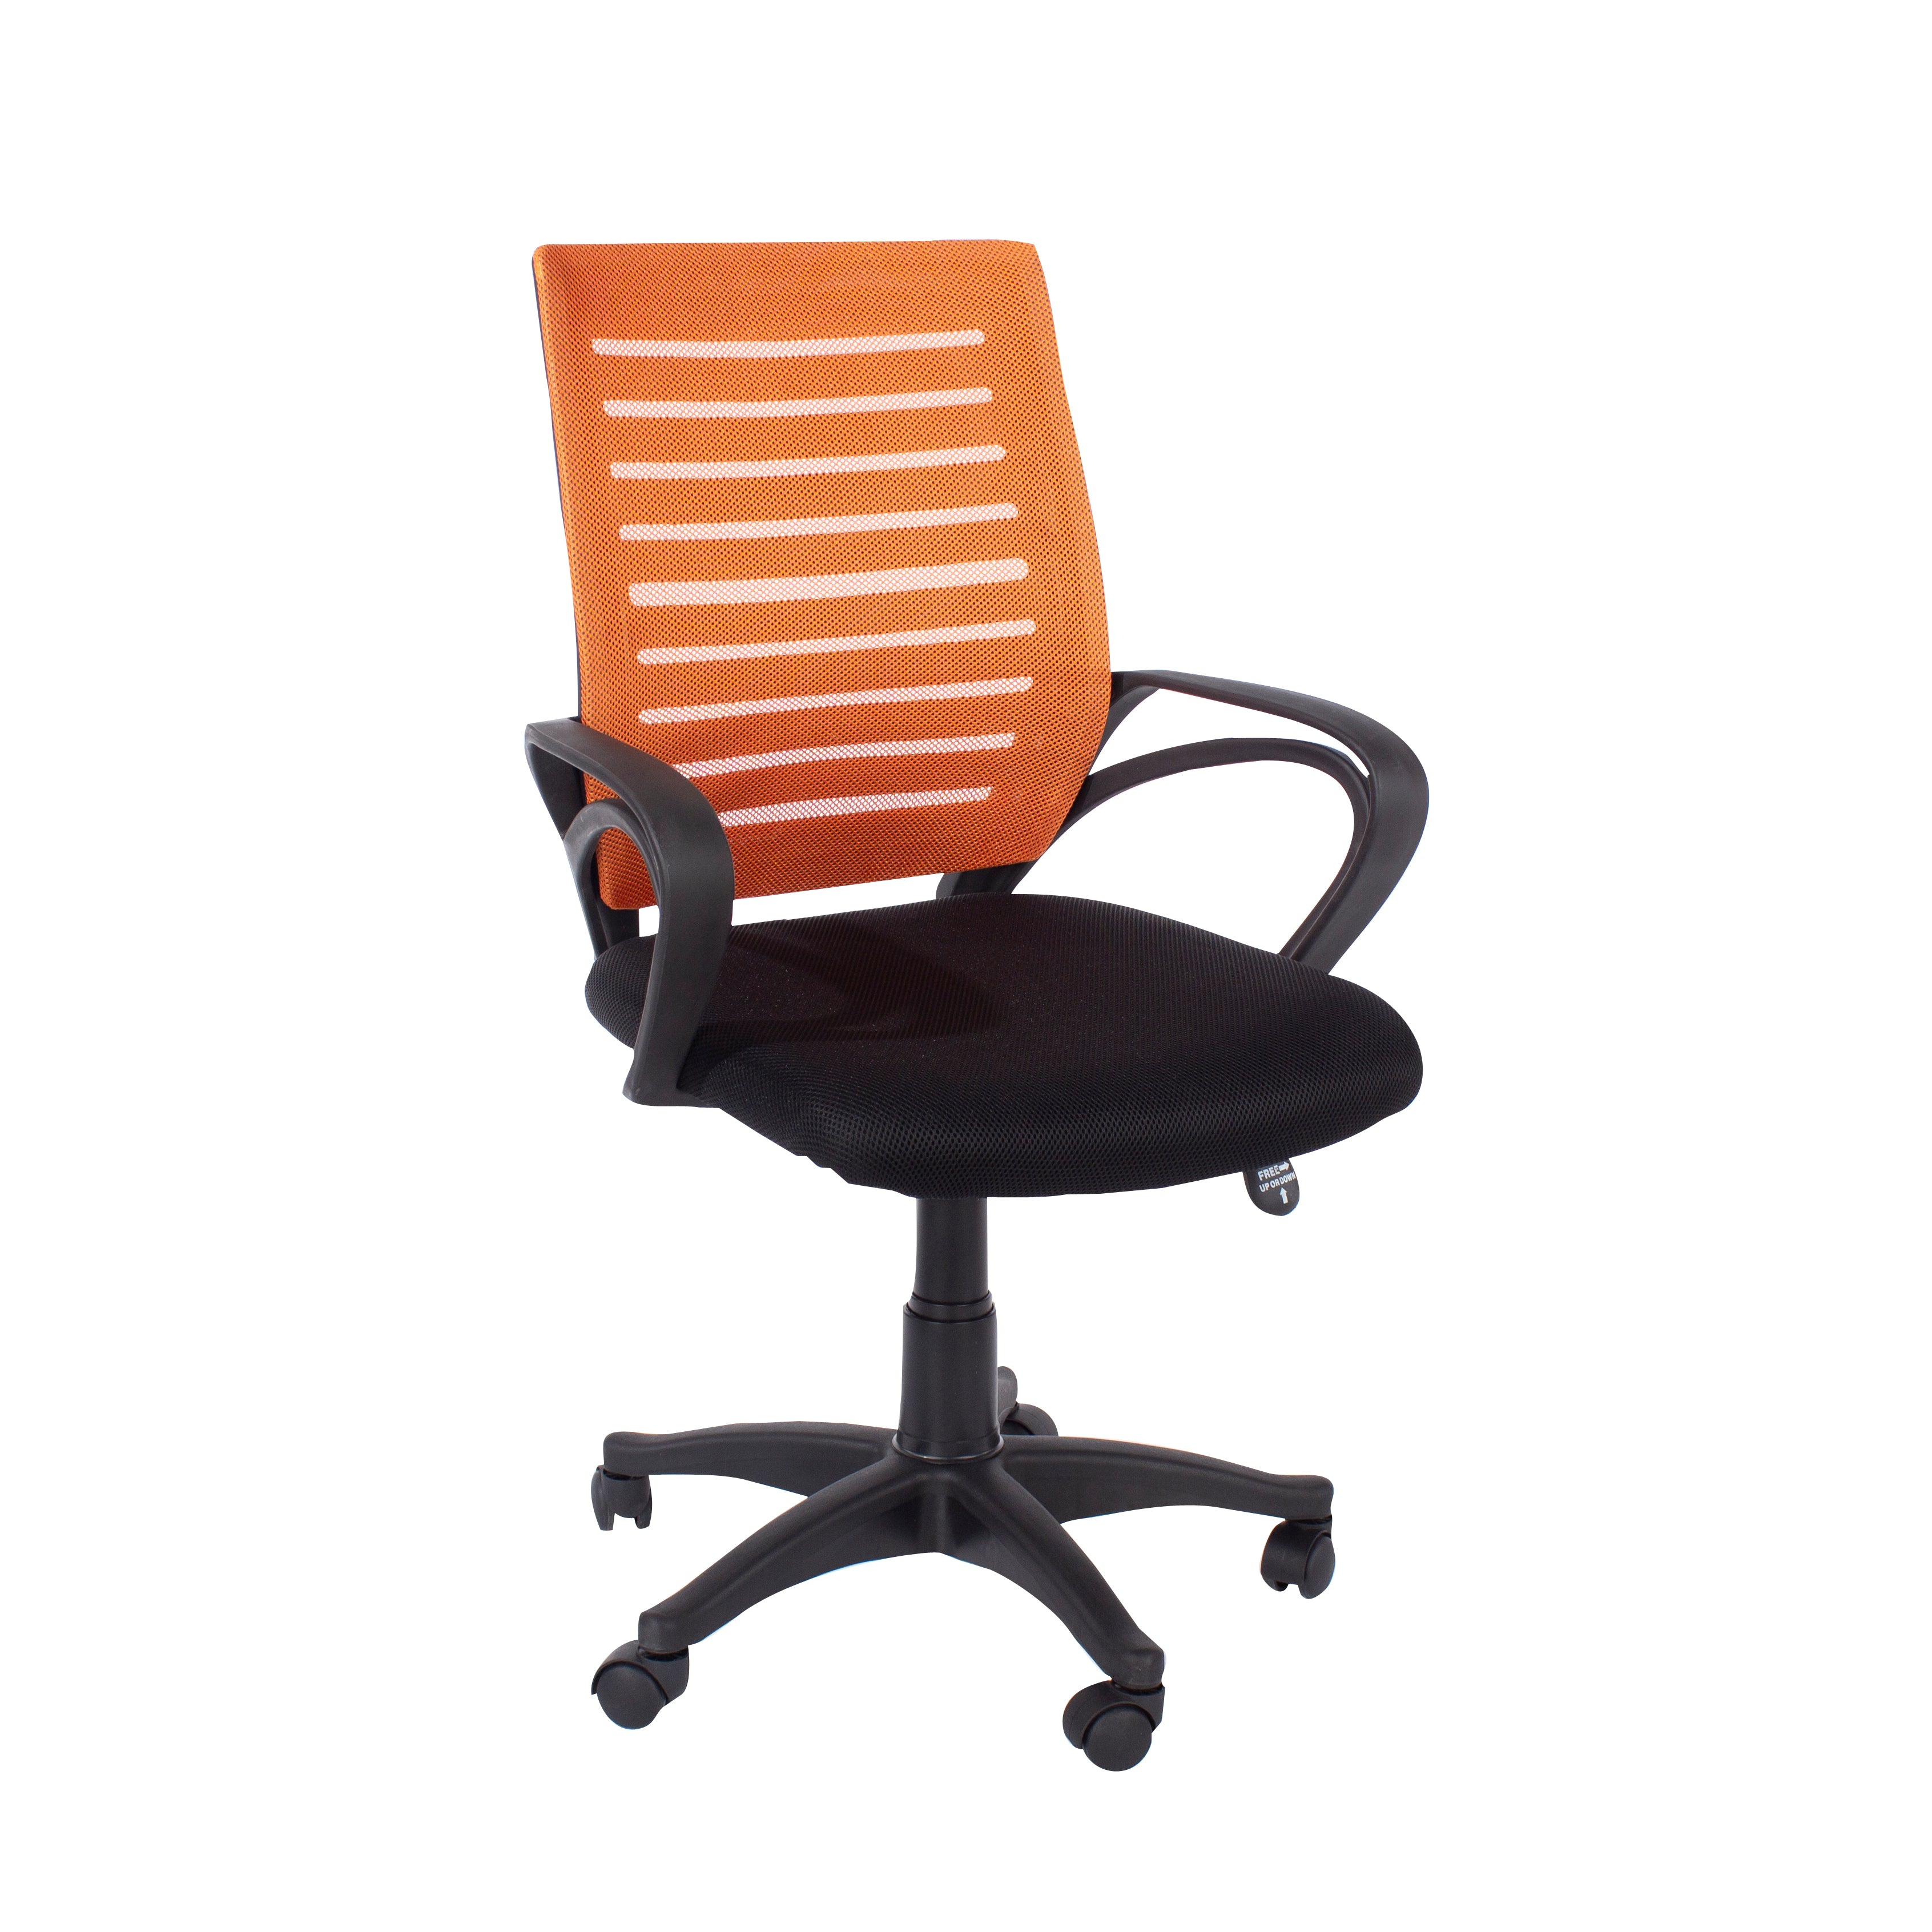 Study Chair With Arms, Orange Mesh Back, Black Fabric Seat & Black Base